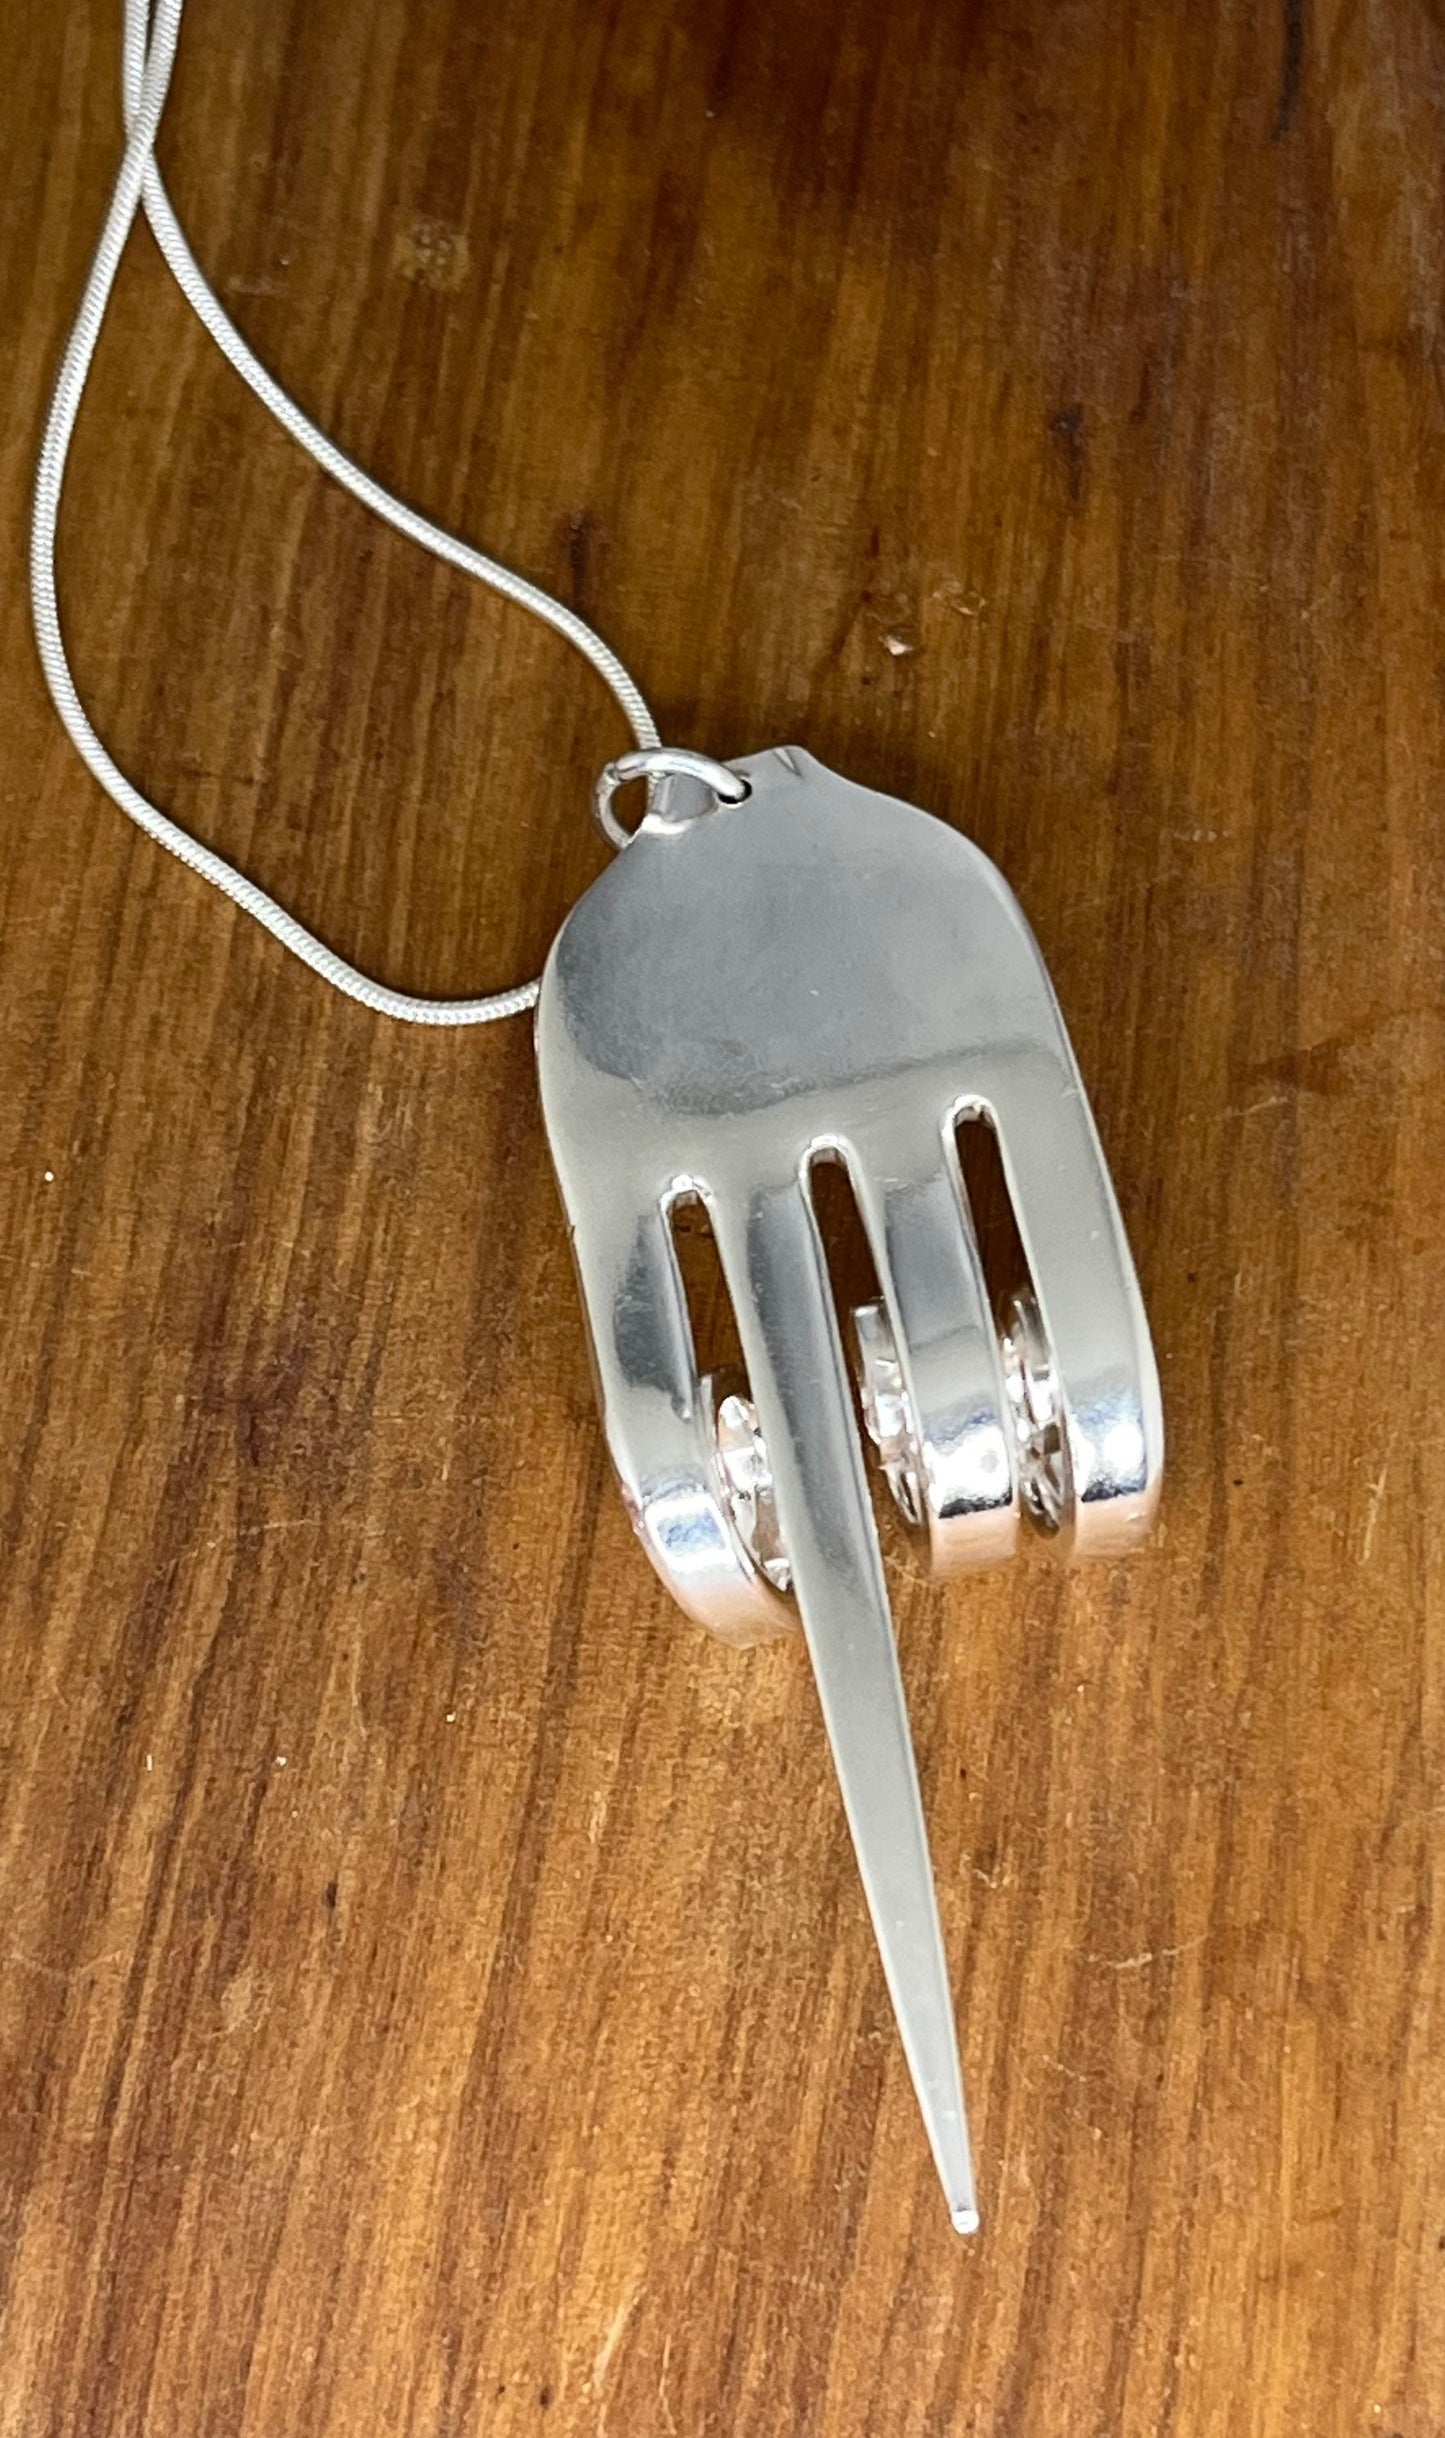 Fork You fork pendant made from vintage silver plated silverware. Gift for friend. Unique pendant. Fork you.